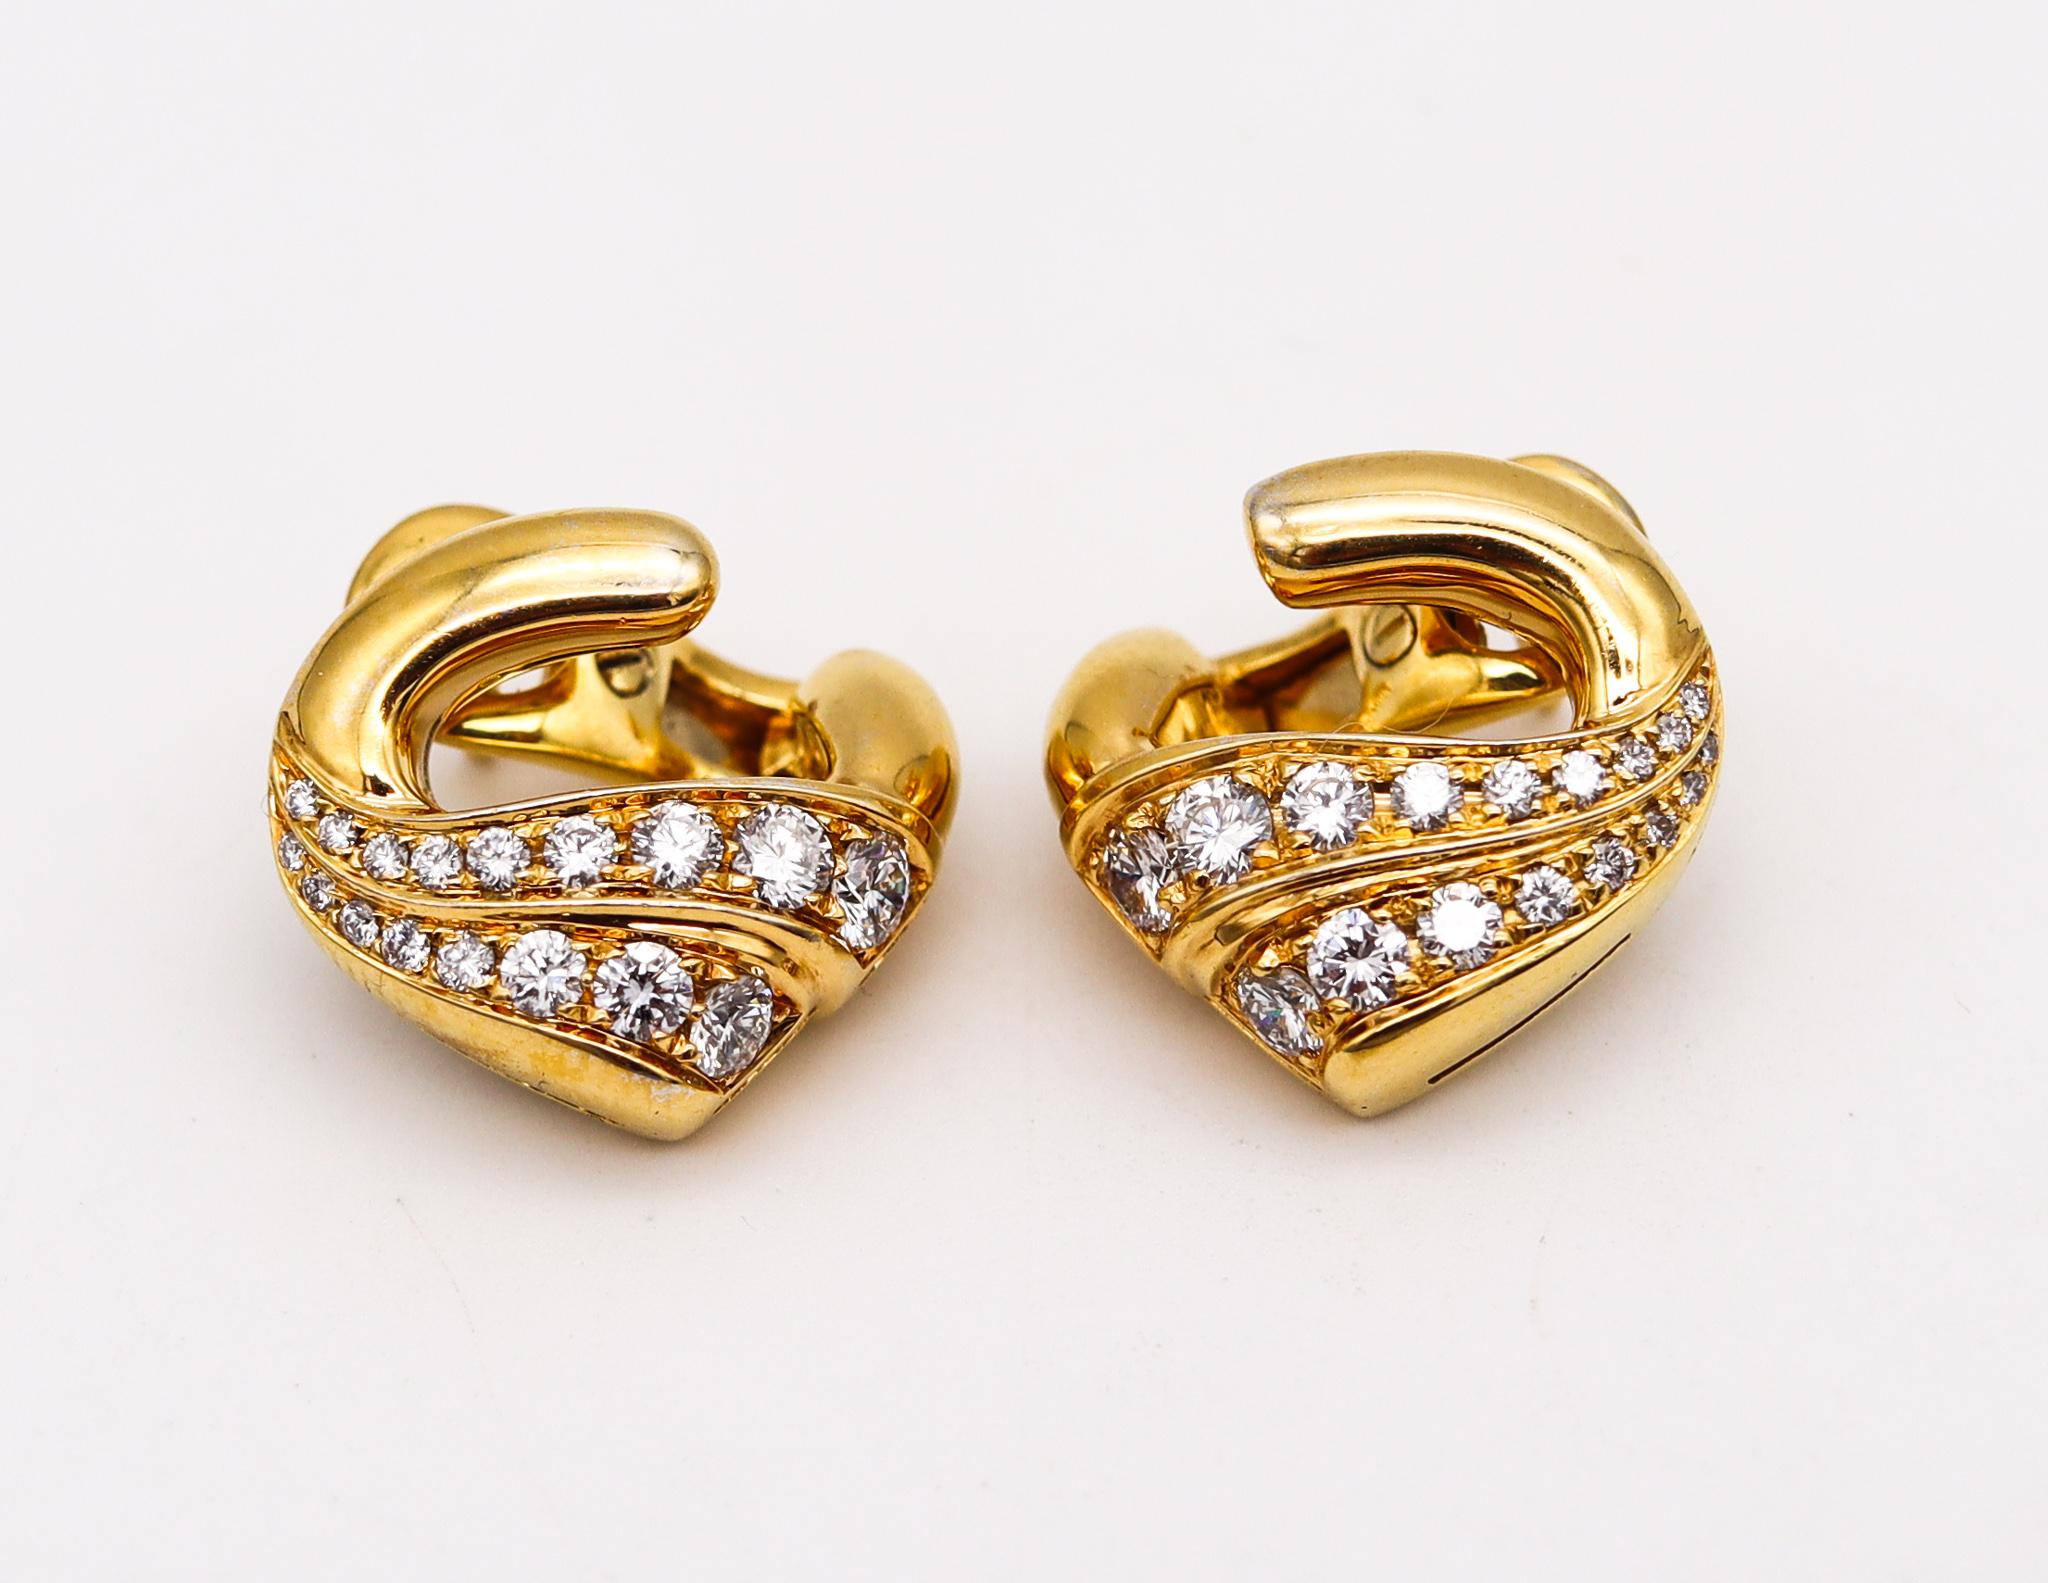 Modern Bvlgari Roma Clips Earrings in 18Kt Yellow Gold with 1.76 Cts in VS Diamonds